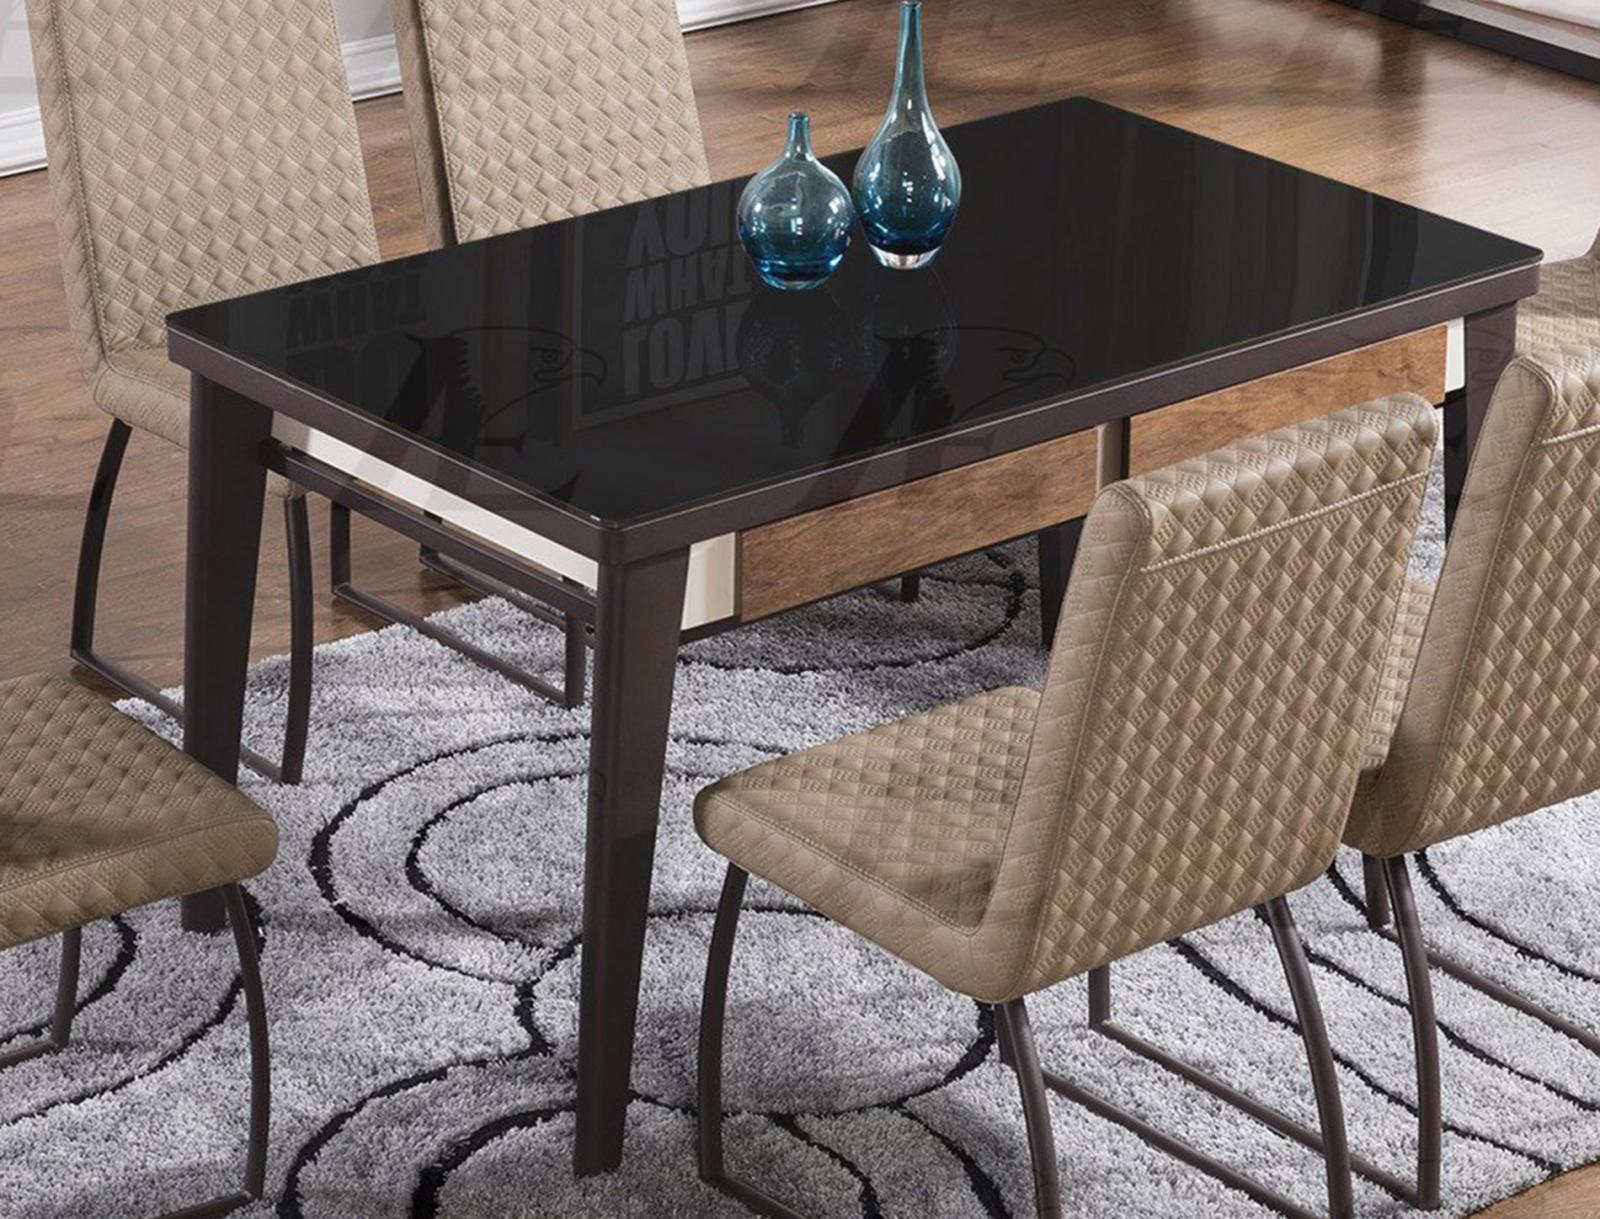 

    
American Eagle Furniture DT-D326 Black Glass Top Dining Set w/ PU Camel Chairs 5Pcs
